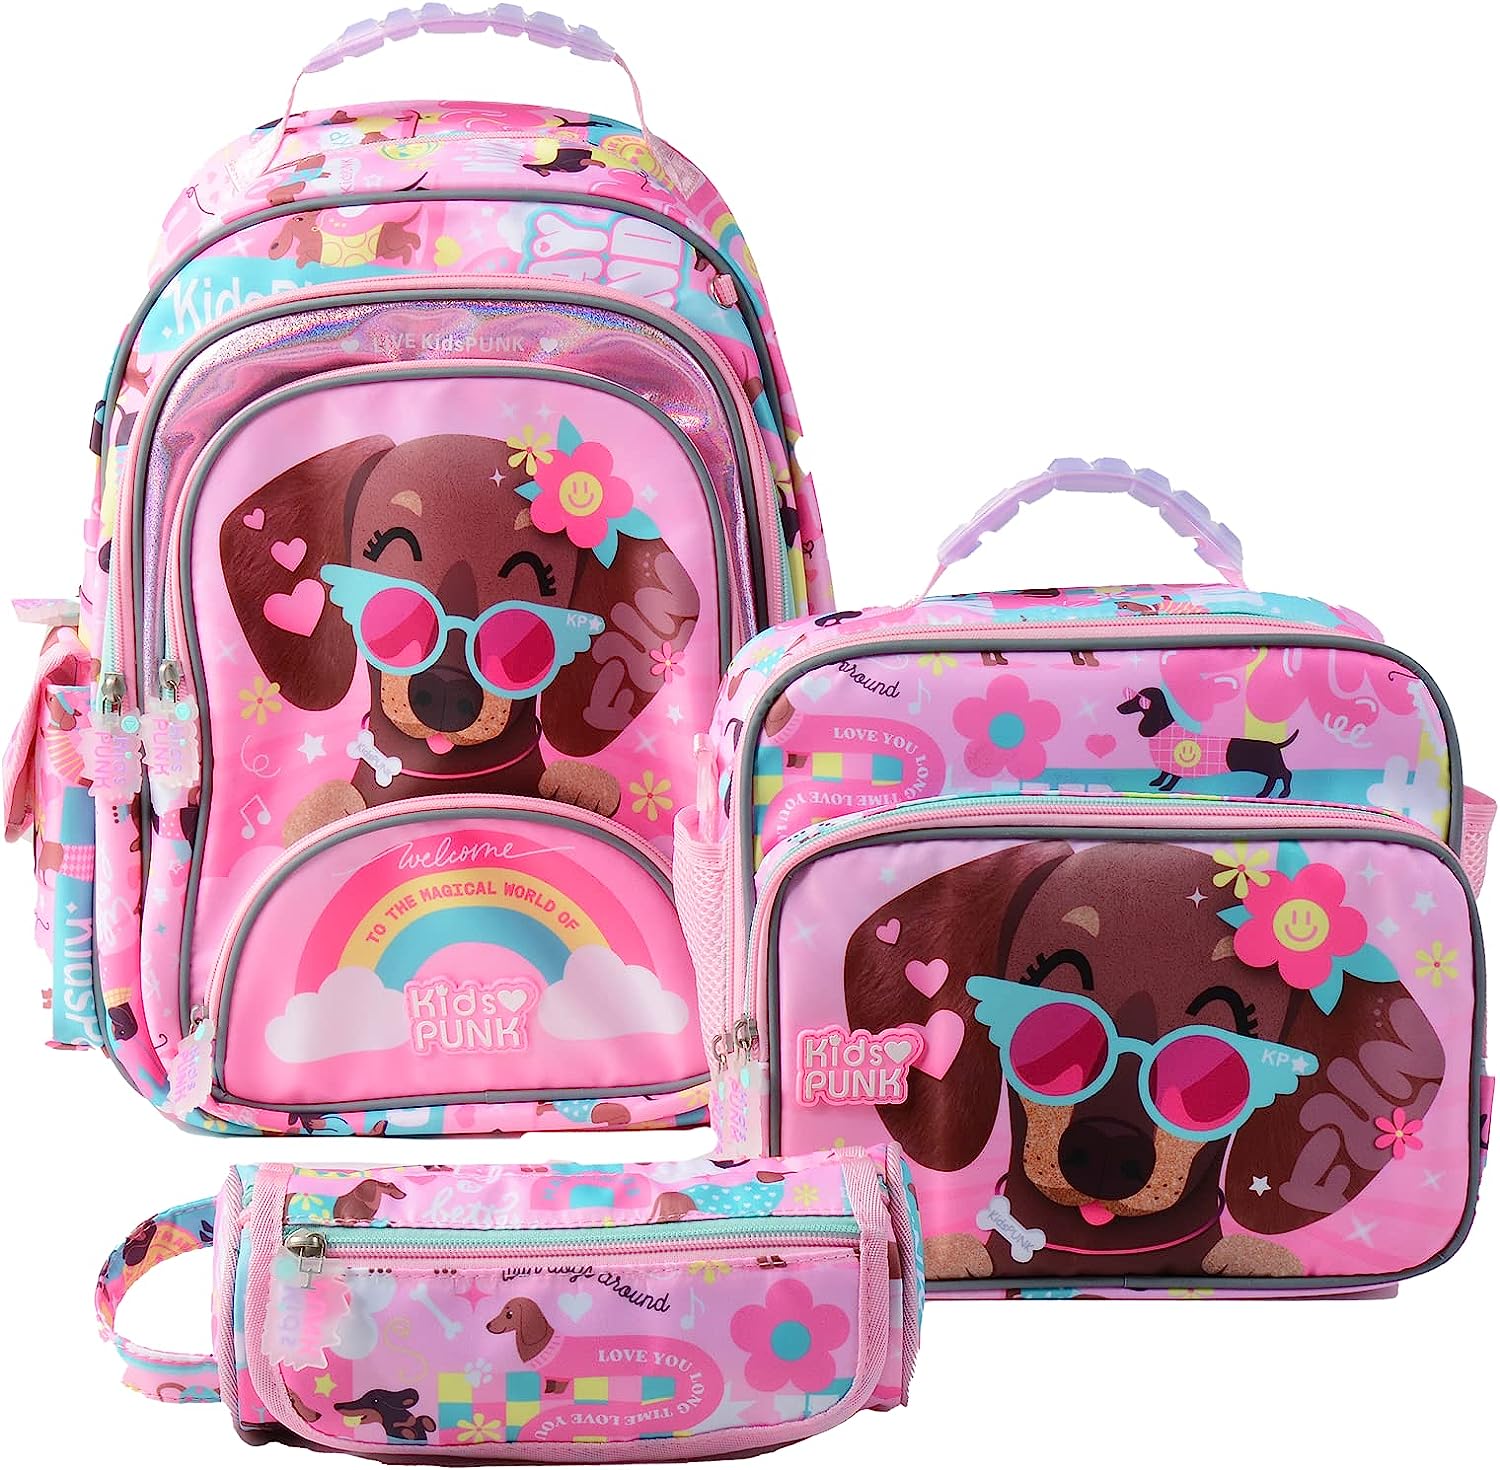 Renewold 3 Pack Toddler Backpack Pomeranian School Bag Lunch Box for Kids Girls Elementary Middle Dog Bookbag with Pencil Case Cute Bagpack Set